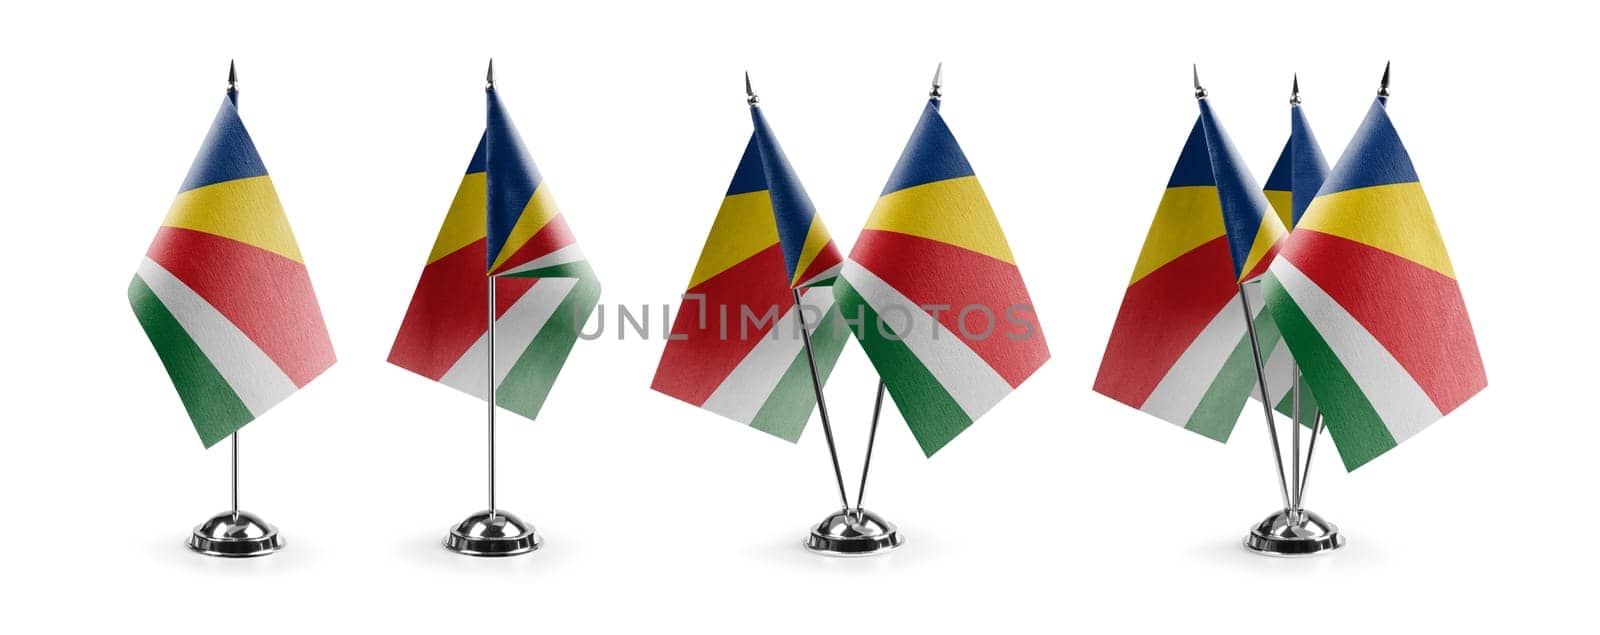 Small national flags of the Seychelles on a white background by butenkow